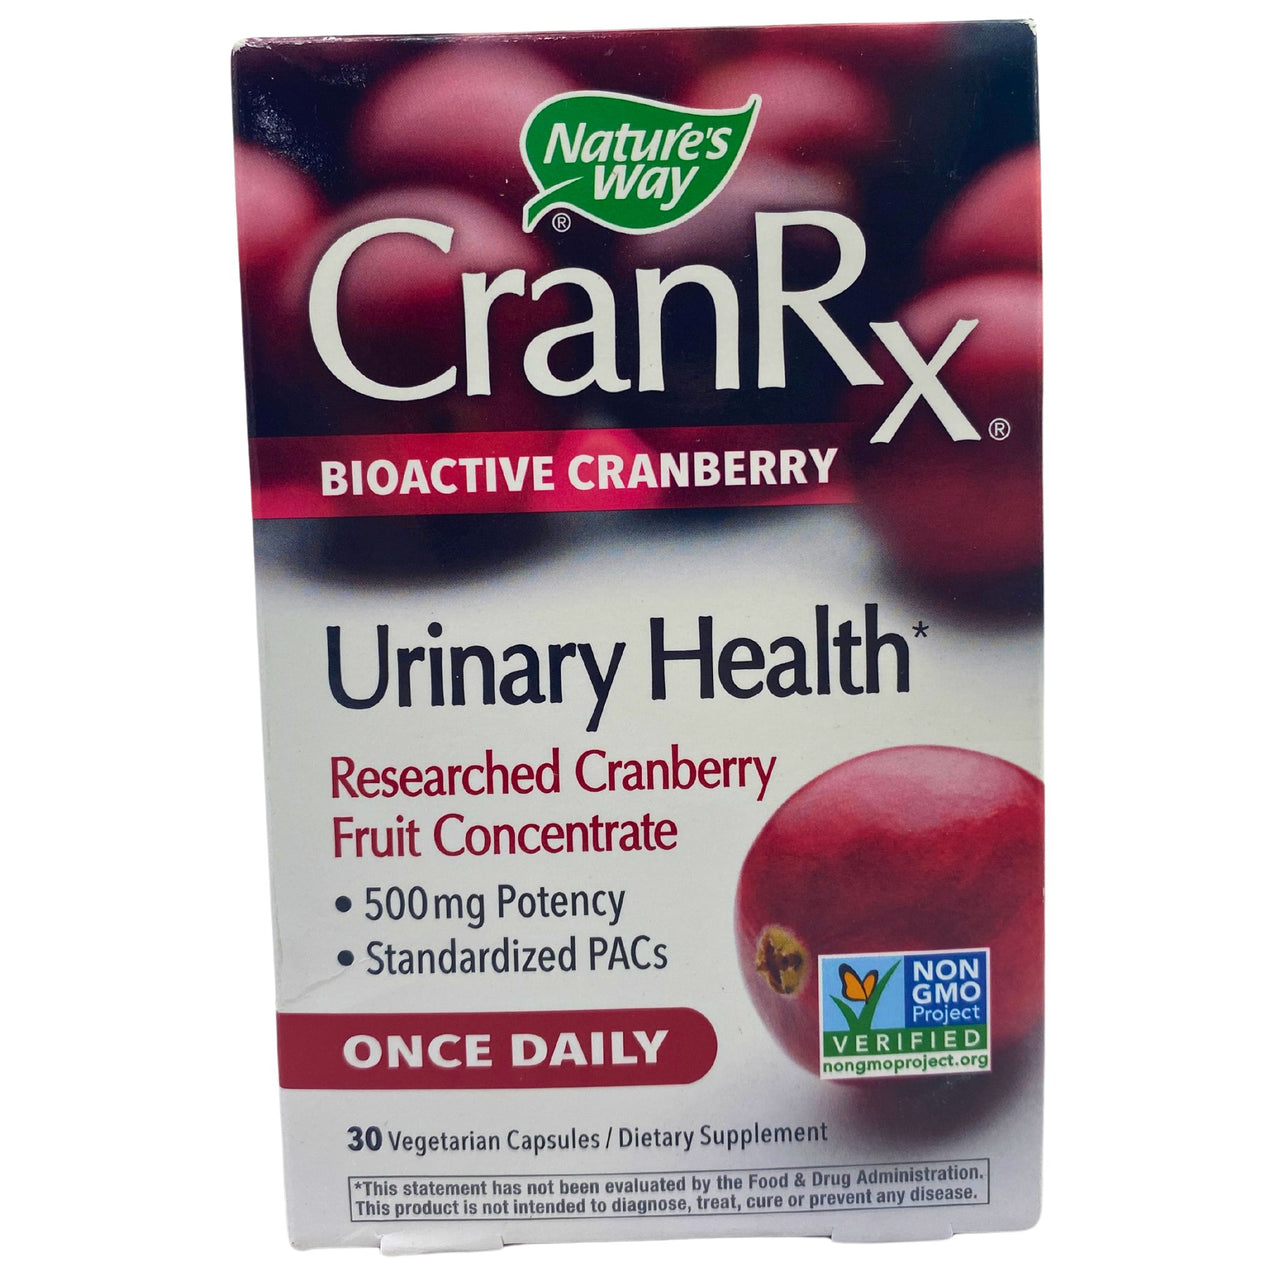 CranRx Bioactive Cranberry Urinary Health Researched Cranberry fruit concentrate 500mg potency